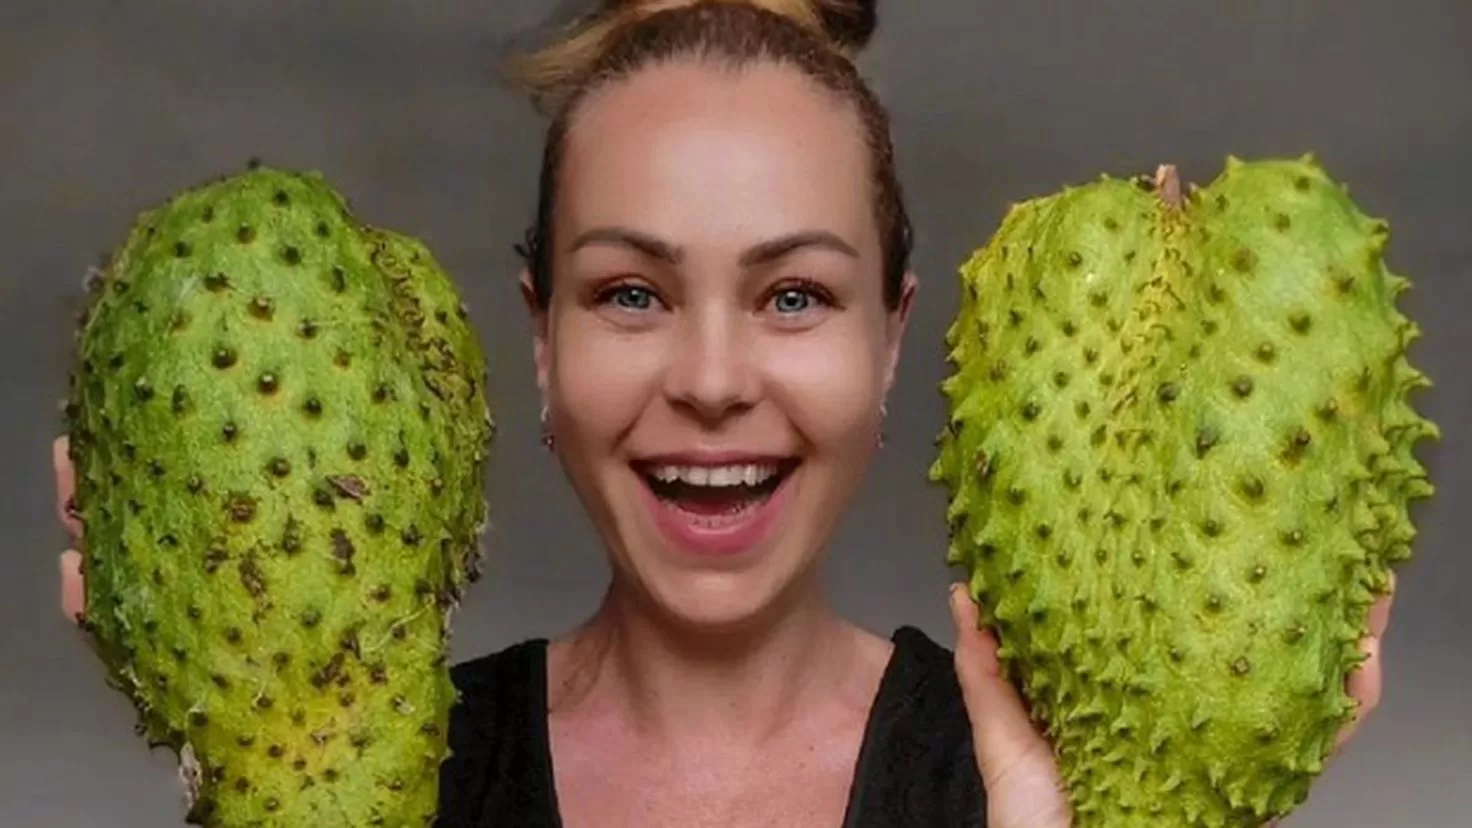 A vegan influencer who only ate fruit dies of malnutrition
